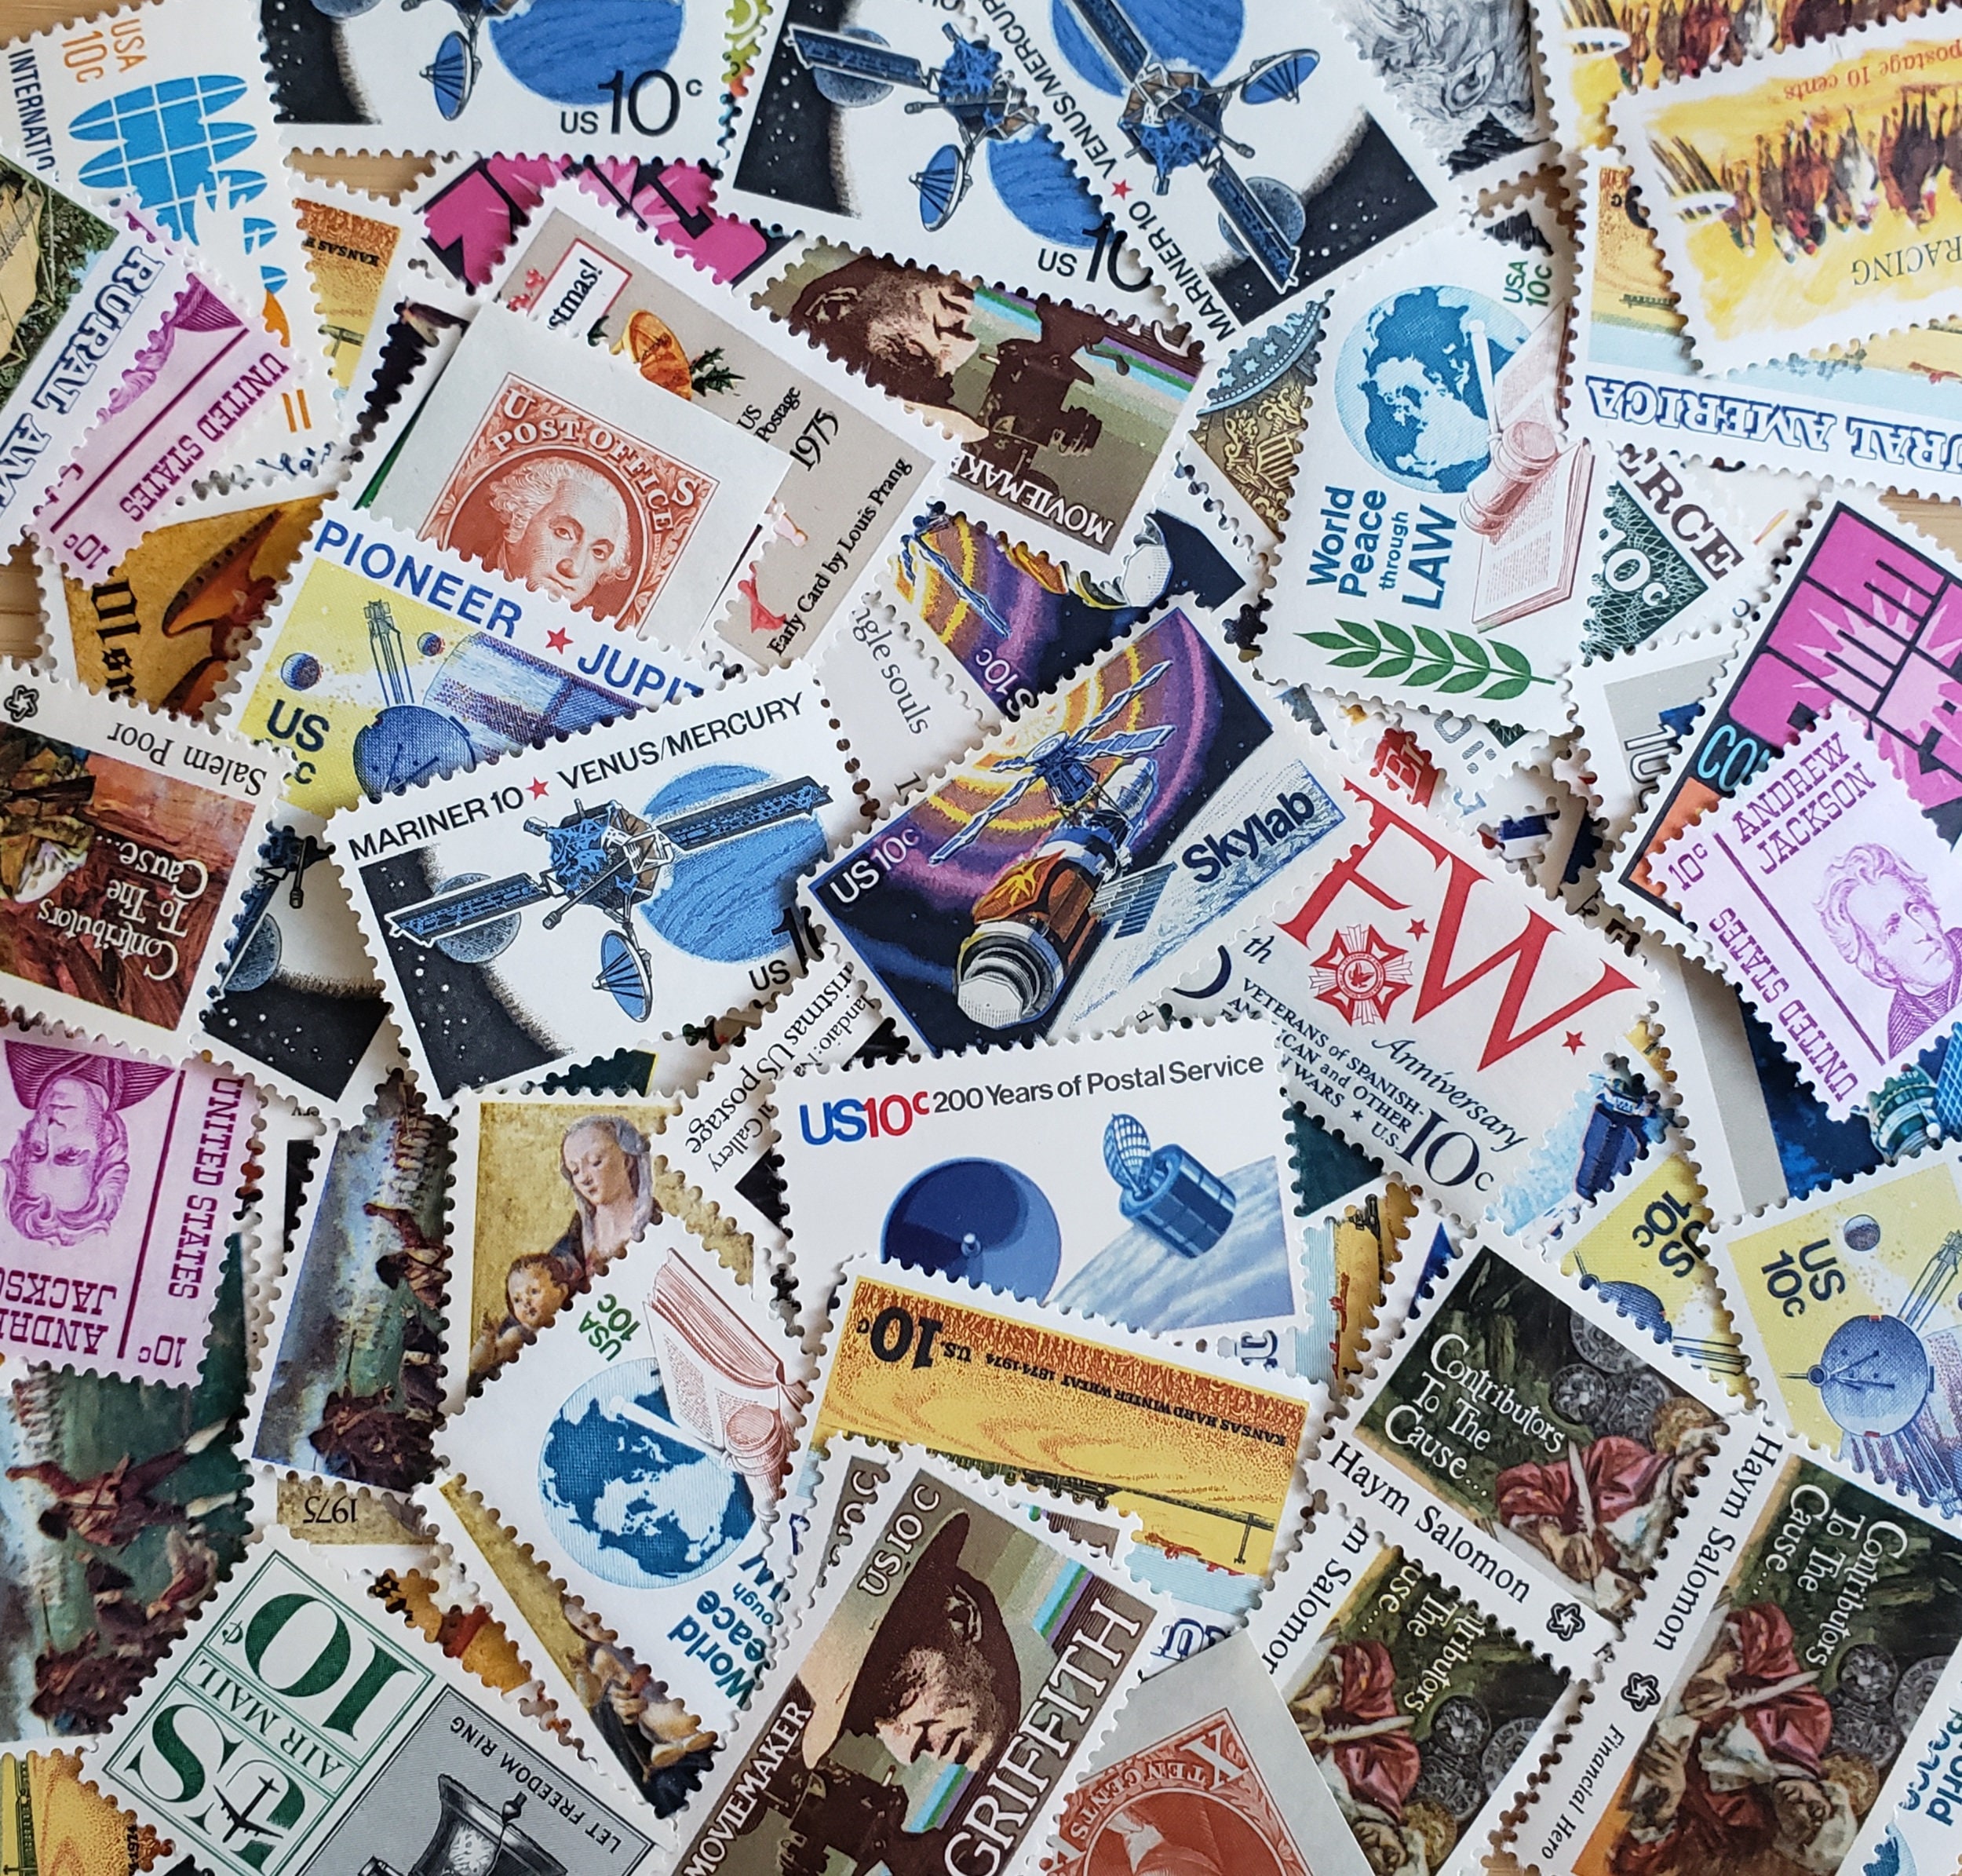 USPS U.S. Stamps of The 80's - 1,000 Piece Jigsaw Puzzle